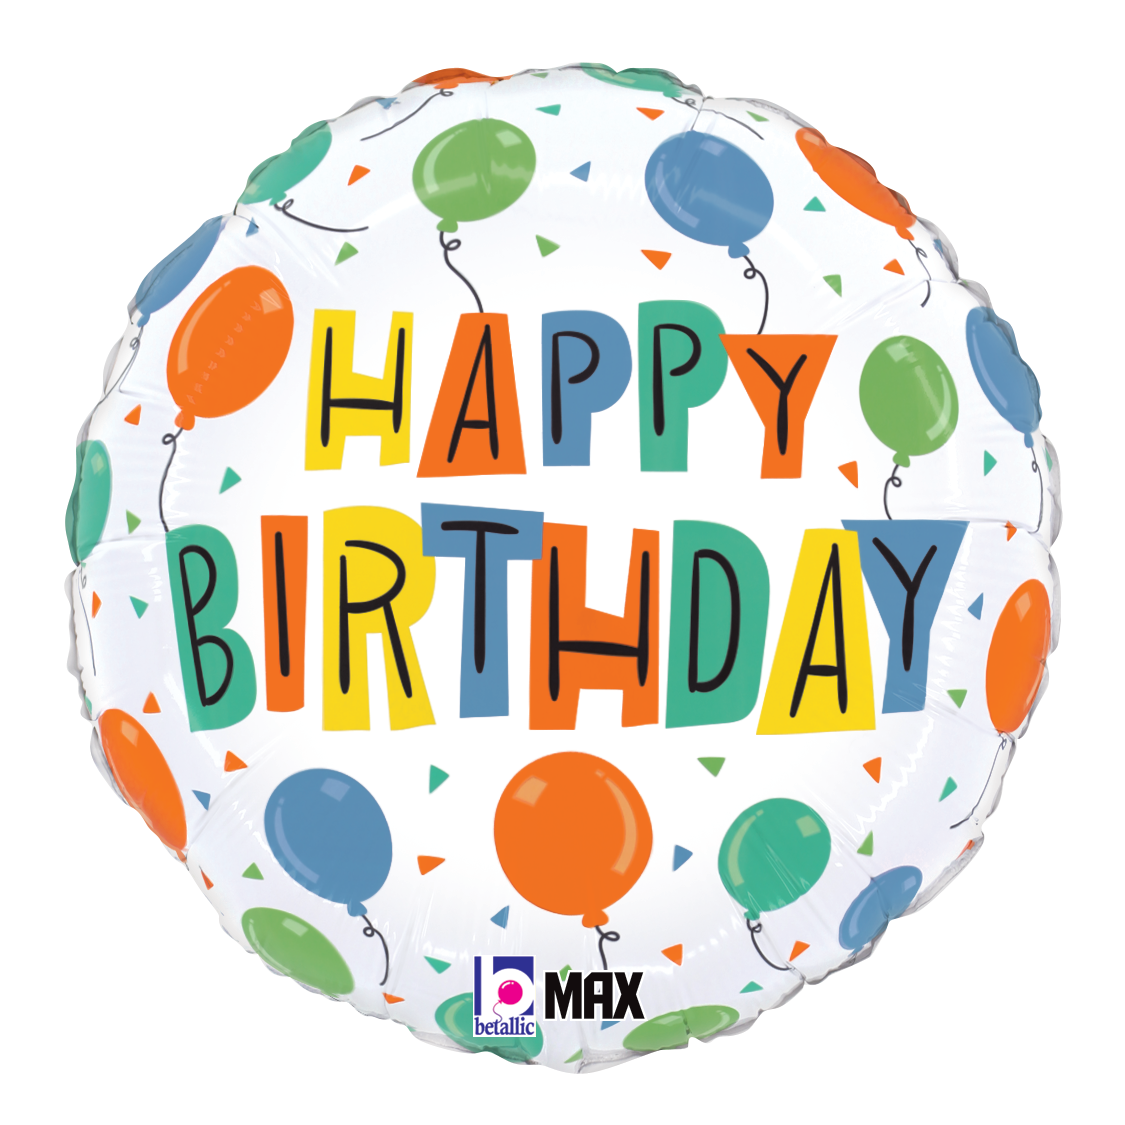 26290_BirthdayPartyBalloons1200x1200.png